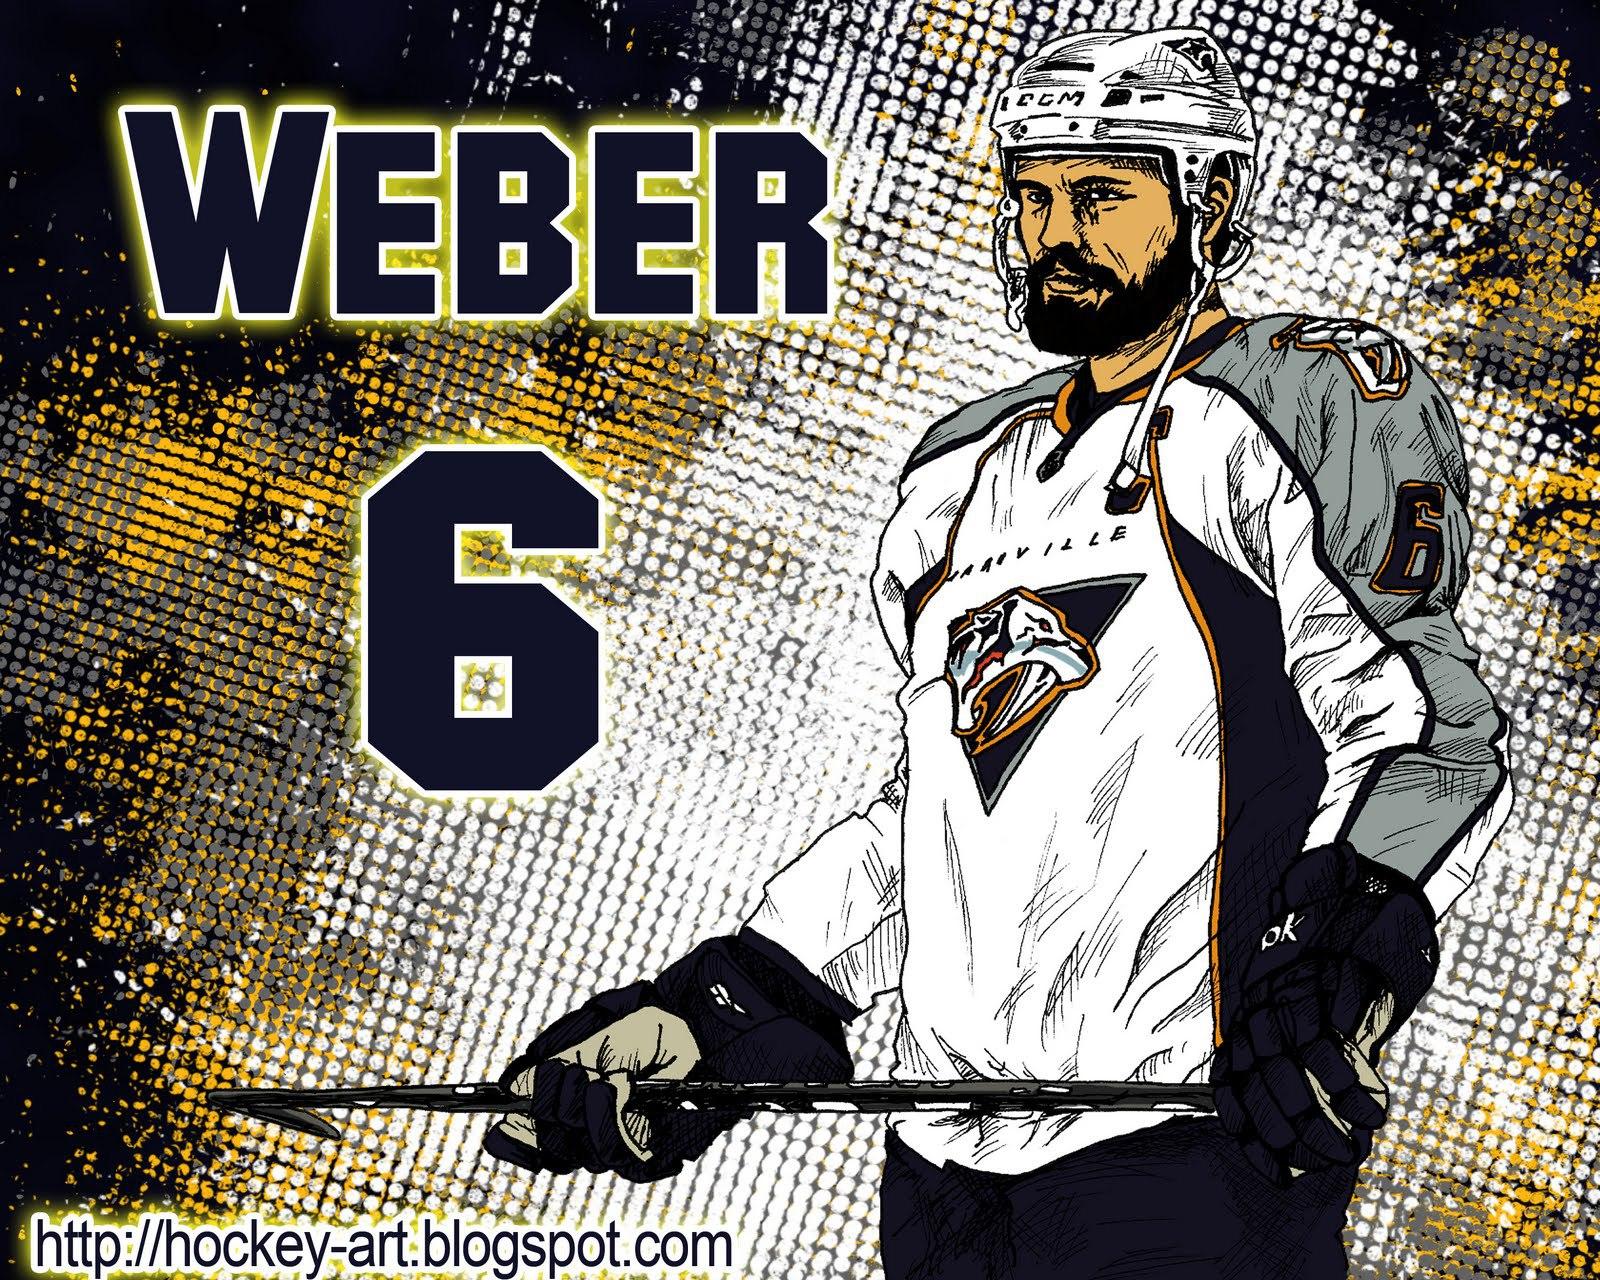 Hockey player SHEA Weber on ice wallpaper and image